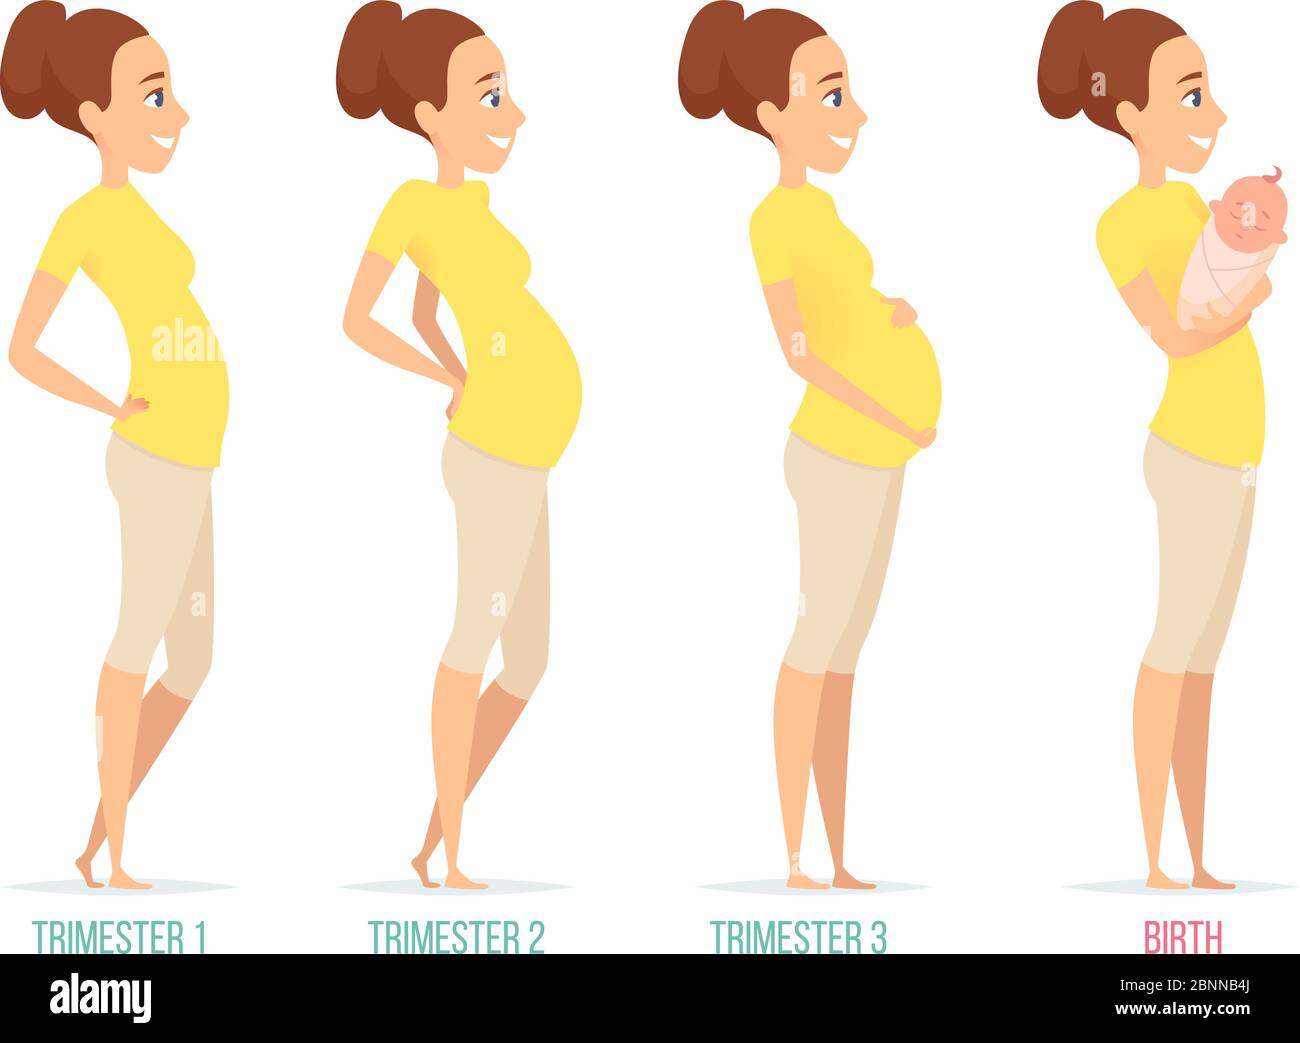 Stages Of Pregnancy Trimesters